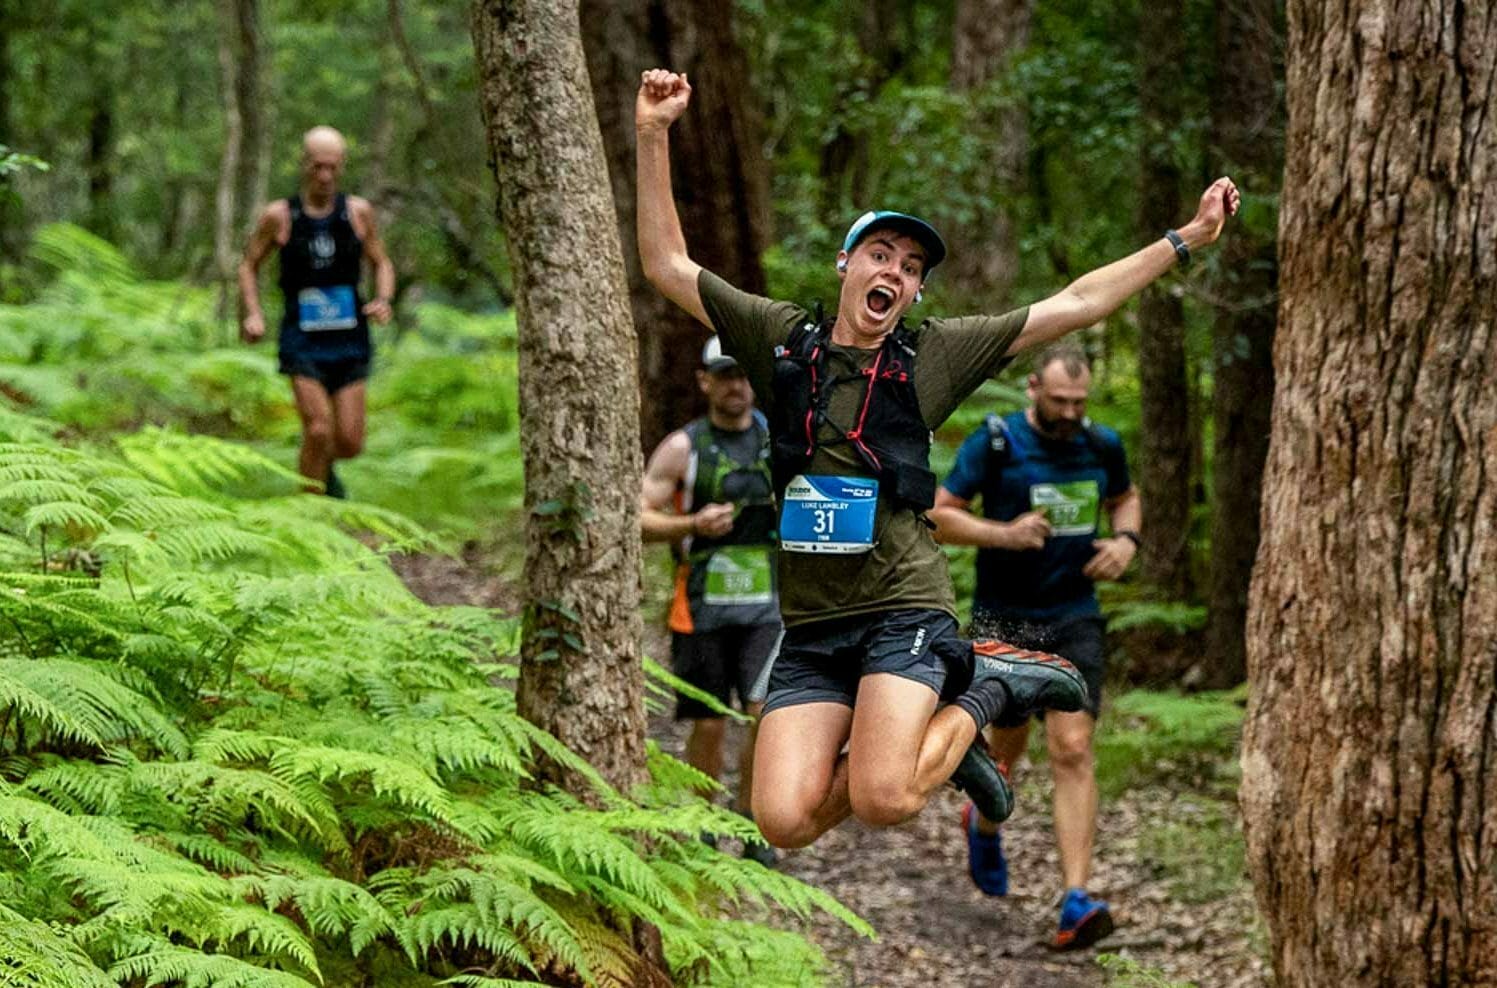 The Bouddi Coastal Run Is An Epic Trail Running Race on the Central Coast, photo by Outer Image Collective, bouddi national park, central coast, nsw, trail running, coast